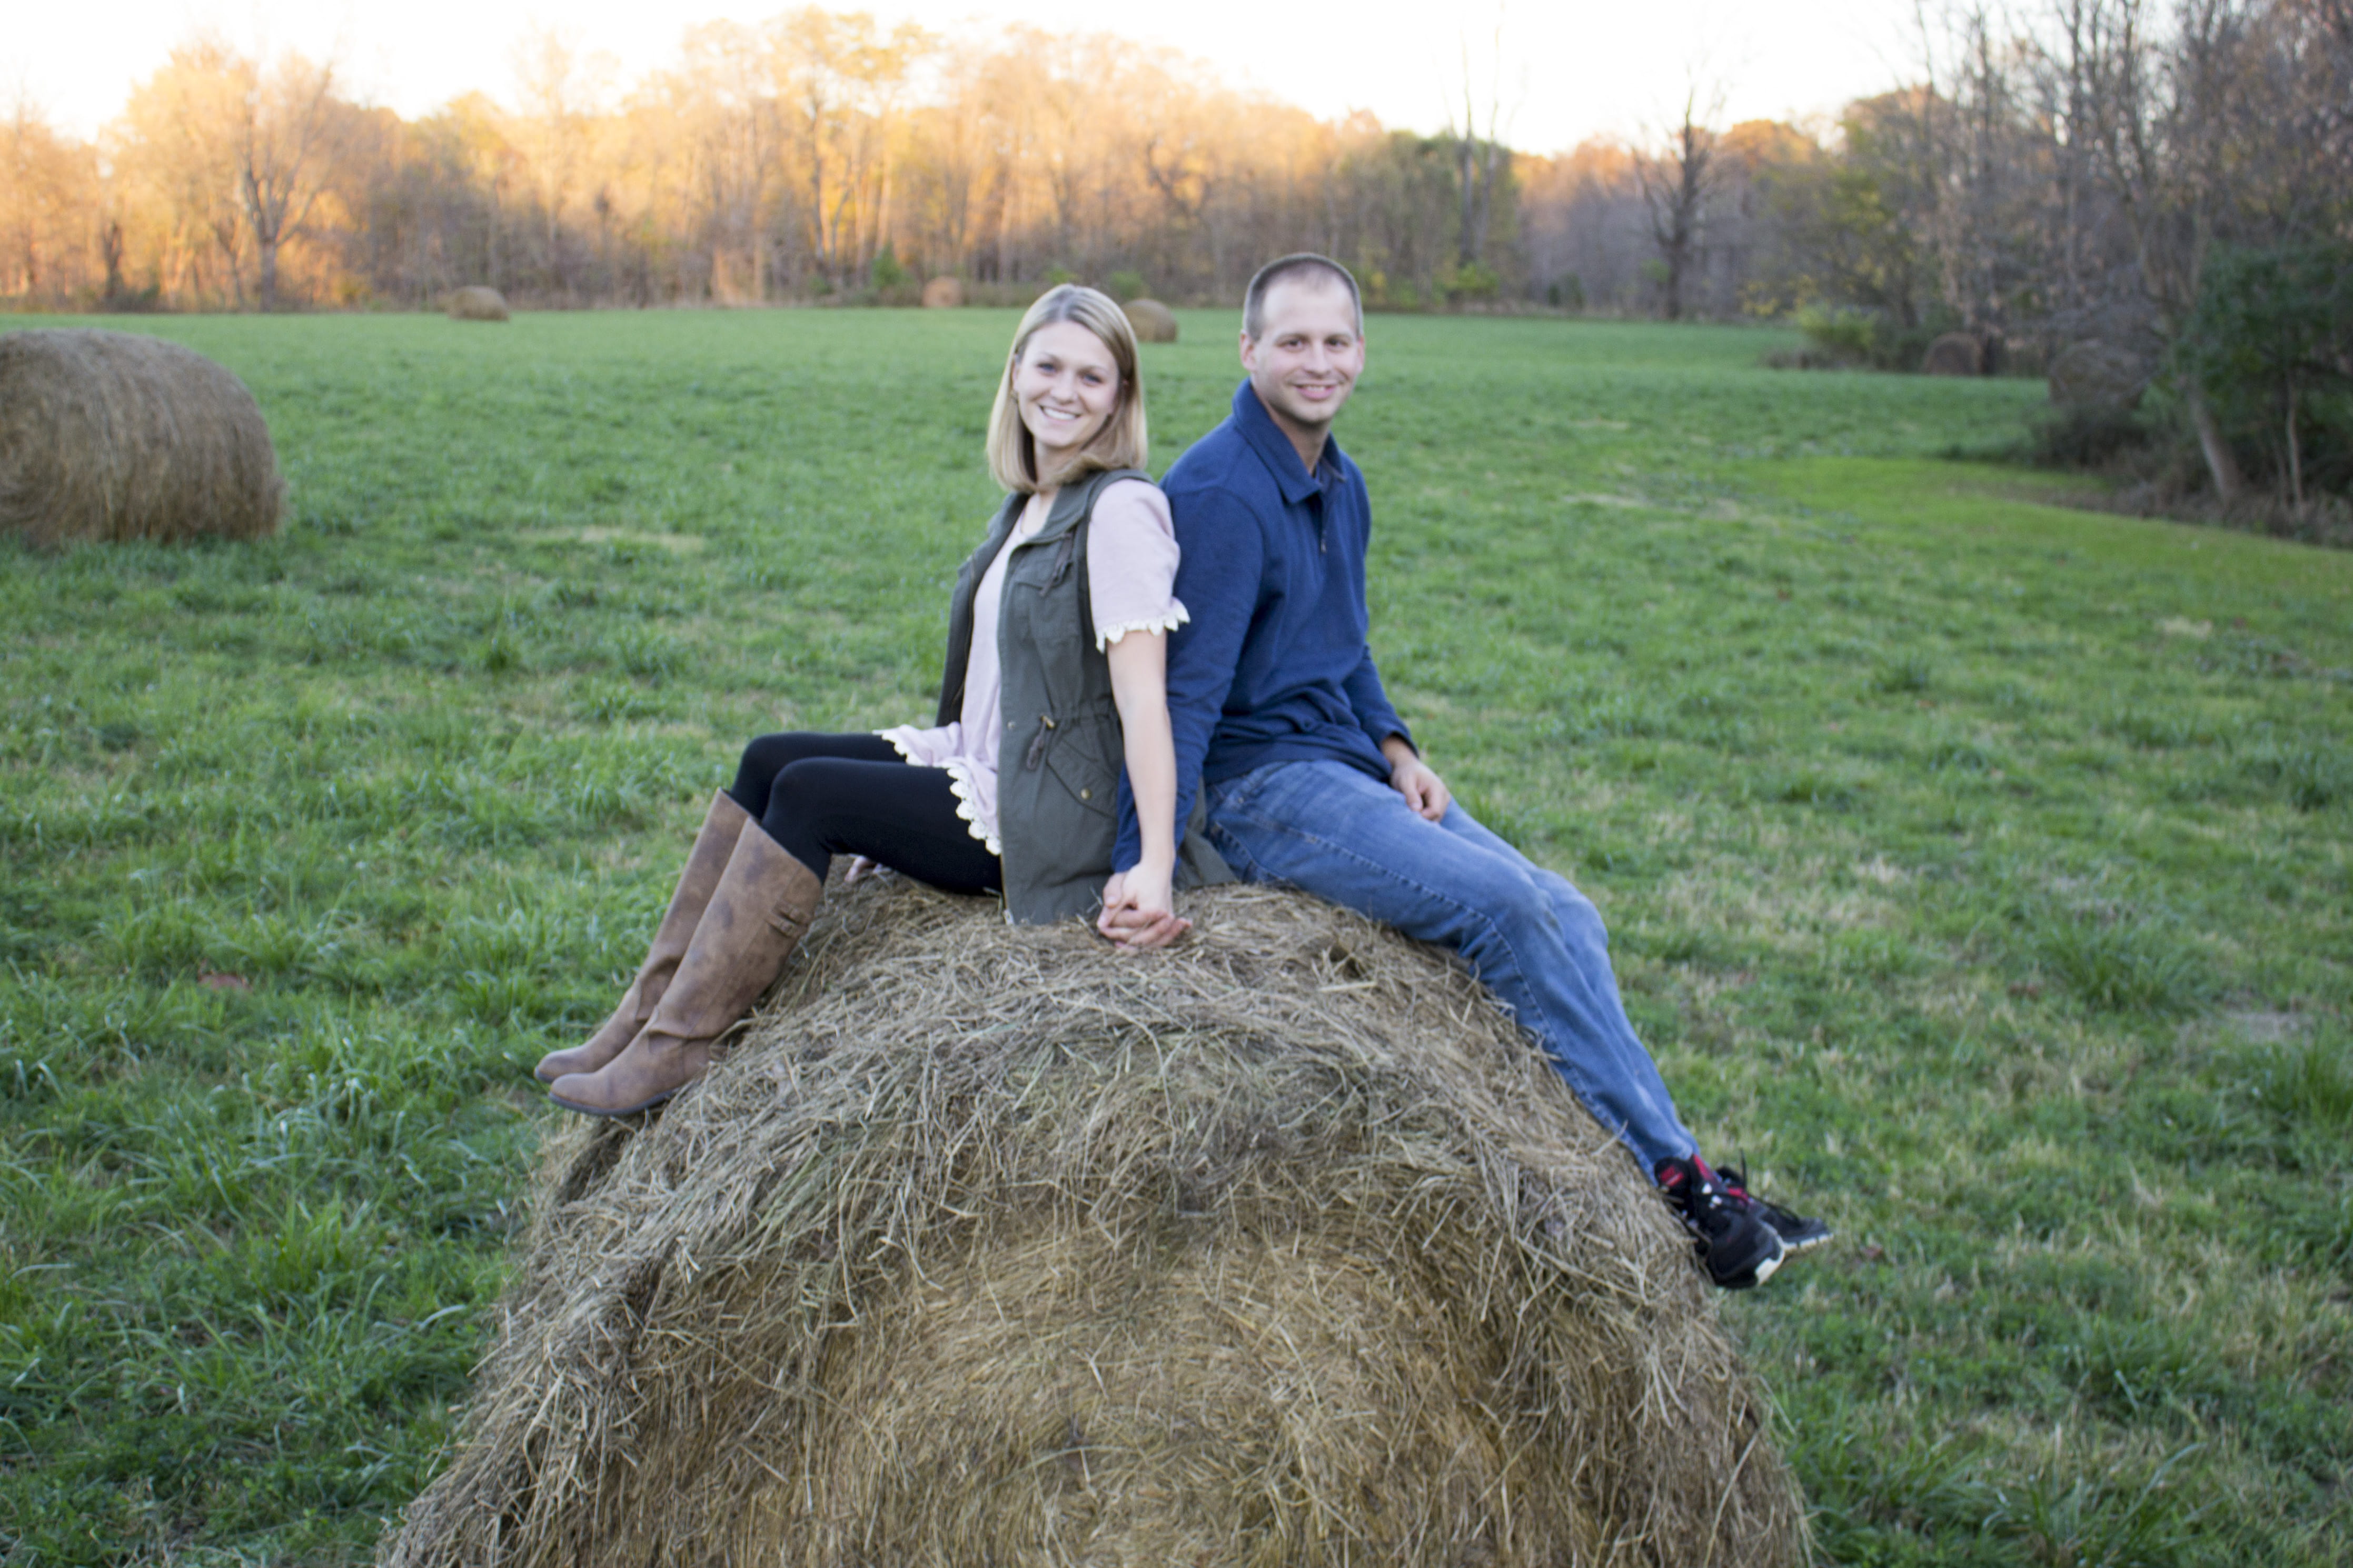 hay, country, love, couple, marriage, bail, hay bail, two people